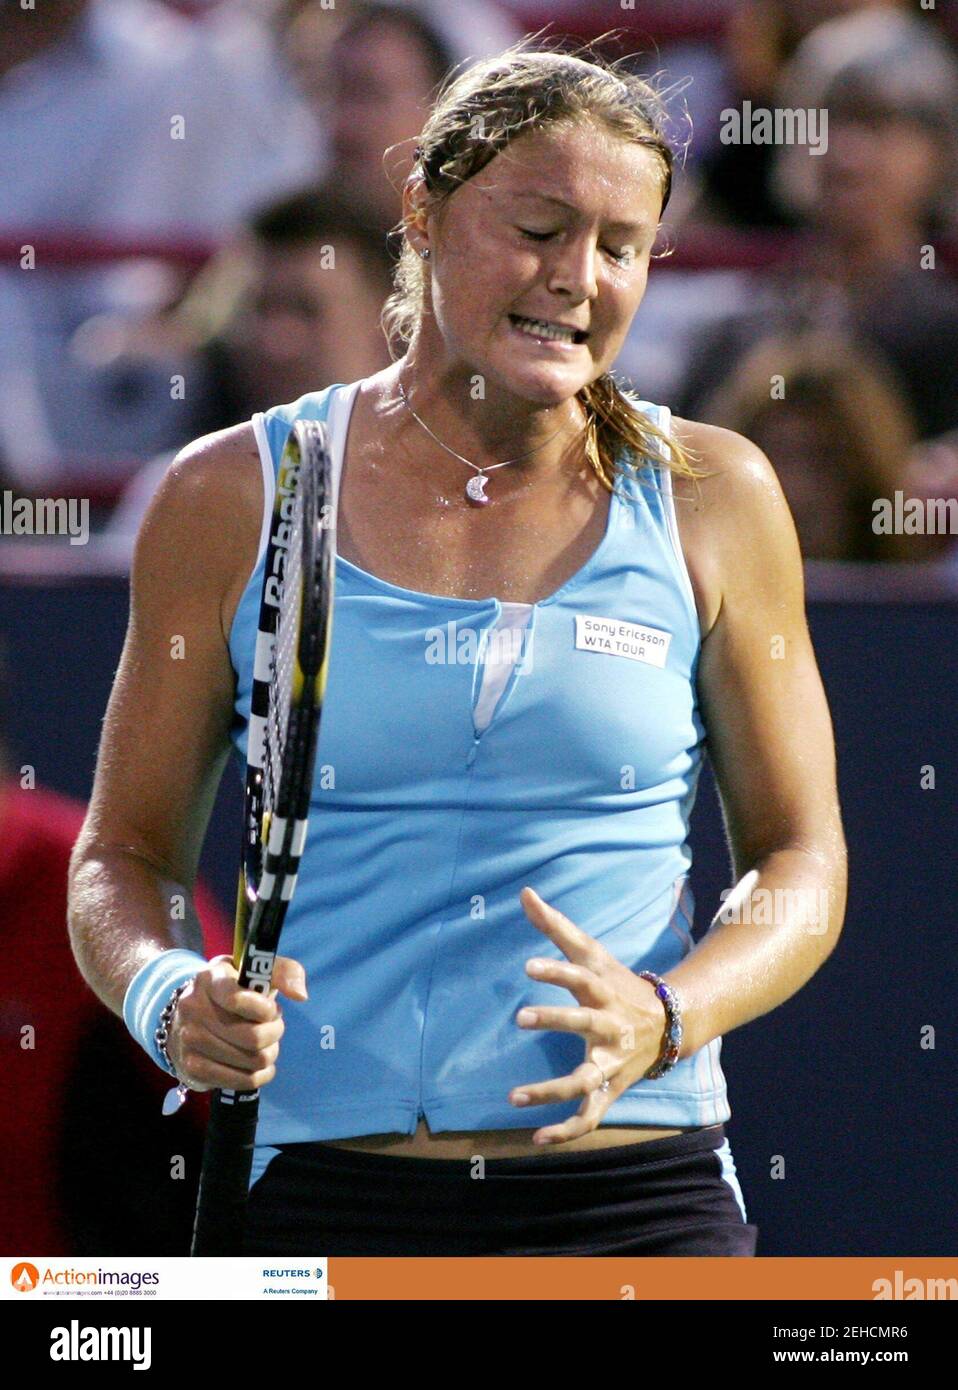 Tennis - Rogers Cup, Sony Ericsson WTA Tour - Montreal, Canada - 15/8/06  Dinara Safina of Russia reacts during her semifinal match against Ana Ivanovic of Serbia at the Rogers Cup, Sony Ericsson WTA Tour in Montreal  Mandatory Credit: Action Images / Chris Wattie  Livepic Stock Photo